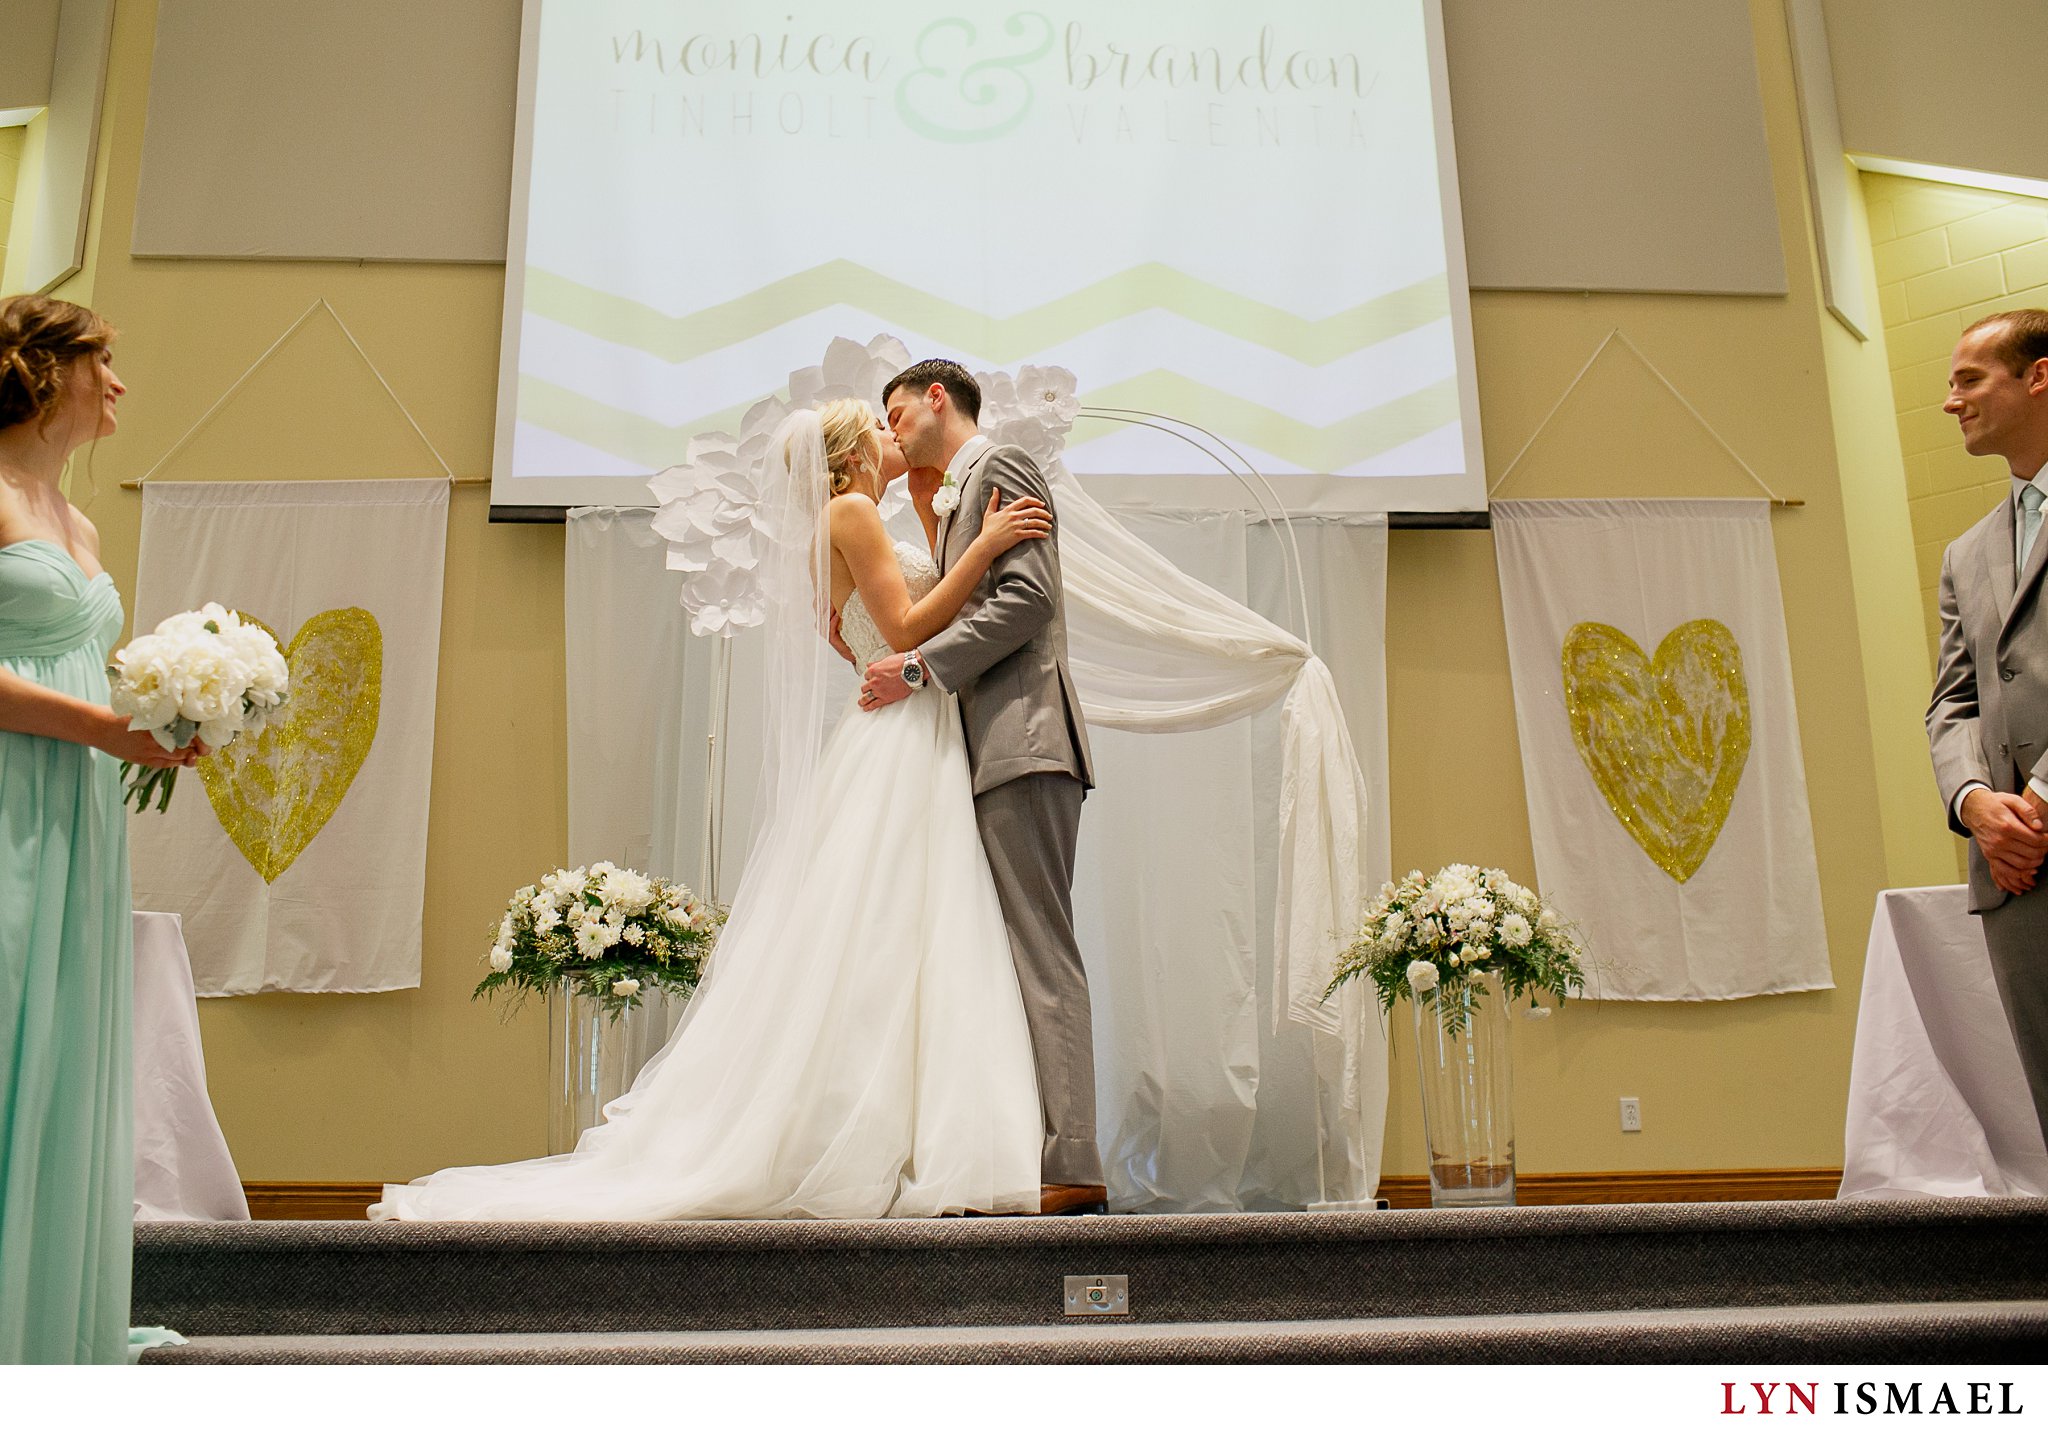 The first kiss at a wedding at Christian Reformed Church in Listowel.